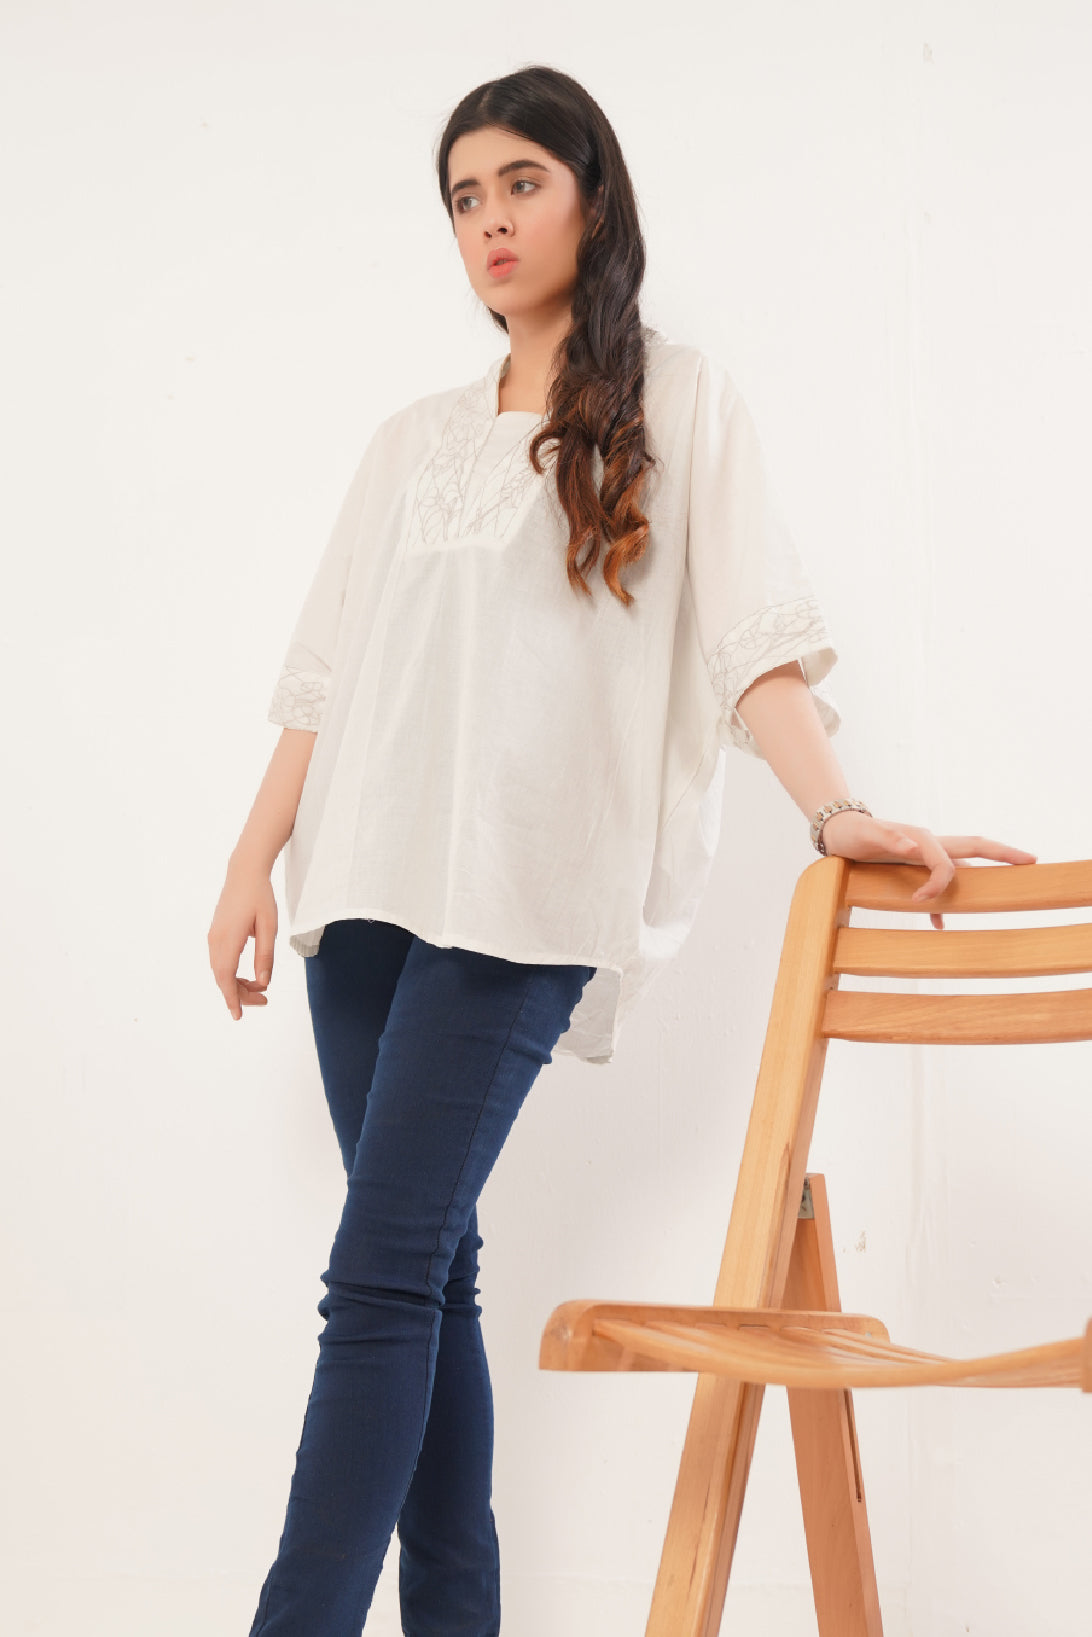 Ladies Lawn light grey loose fitted top enriched with the delicate floral embroidery